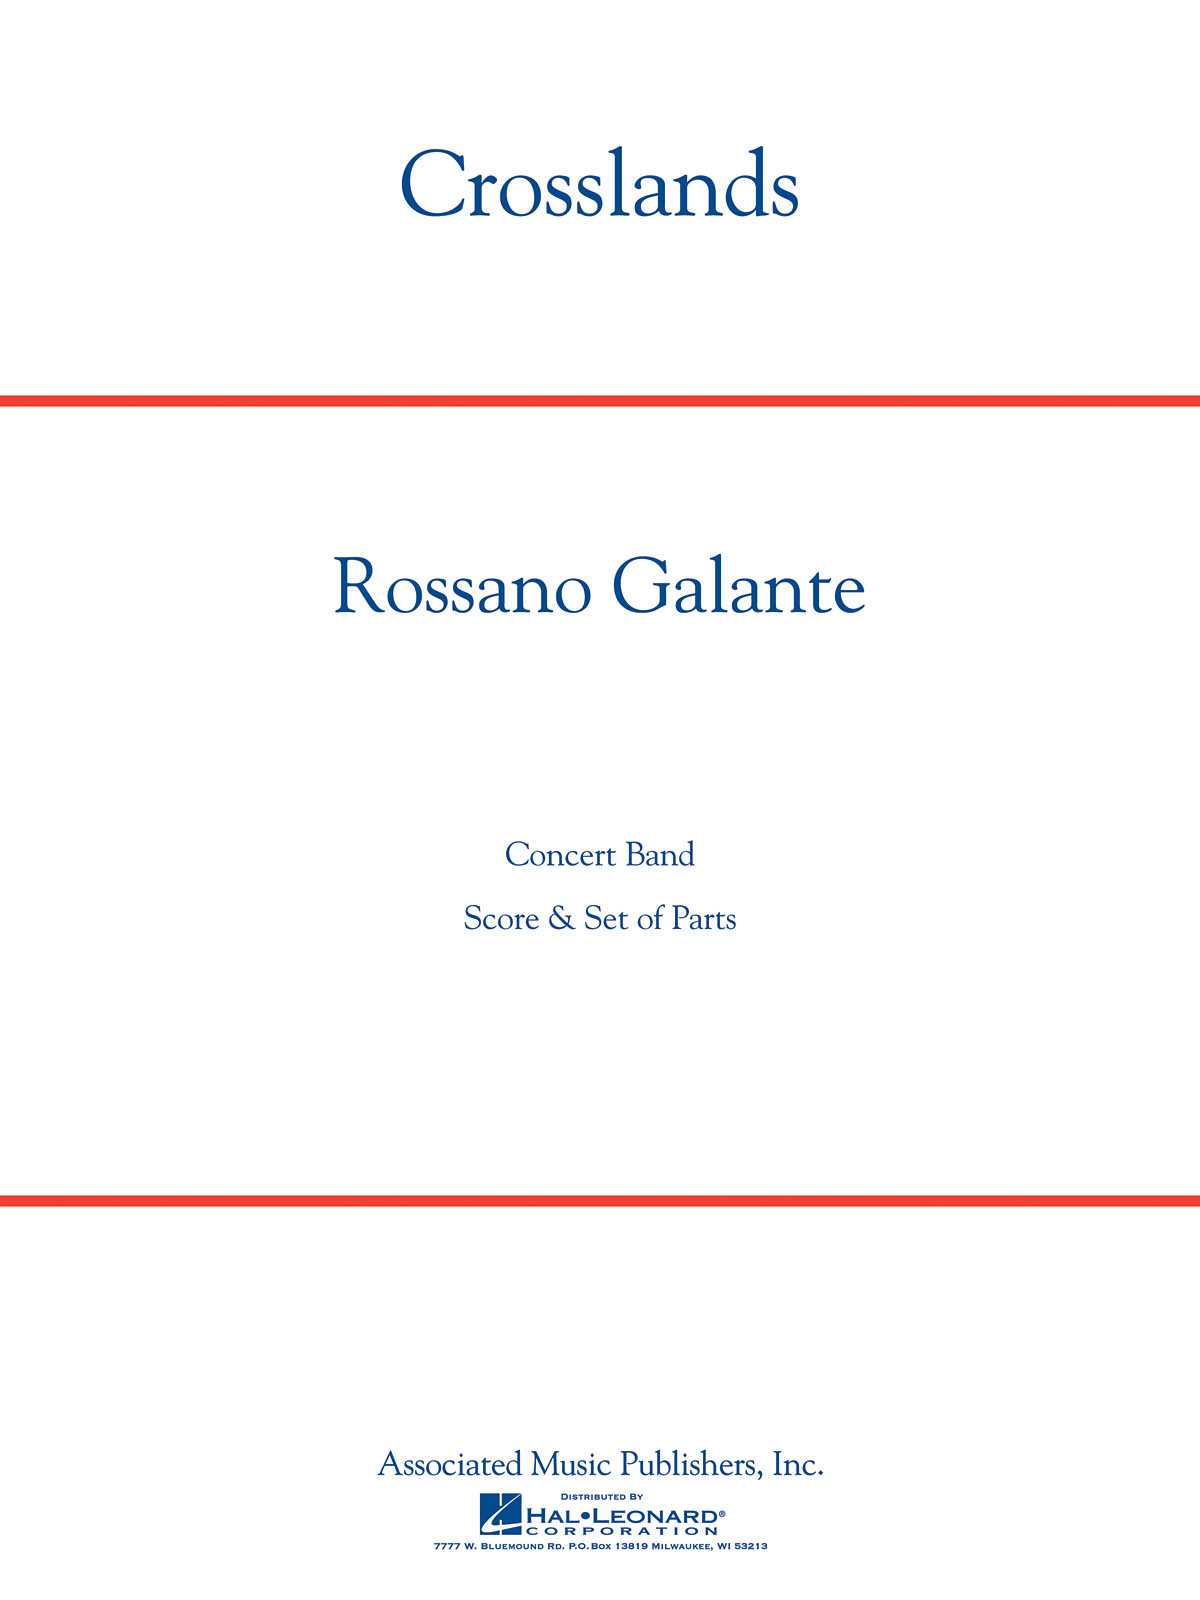 Rossano Galante: Crosslands: Concert Band: Score and Parts